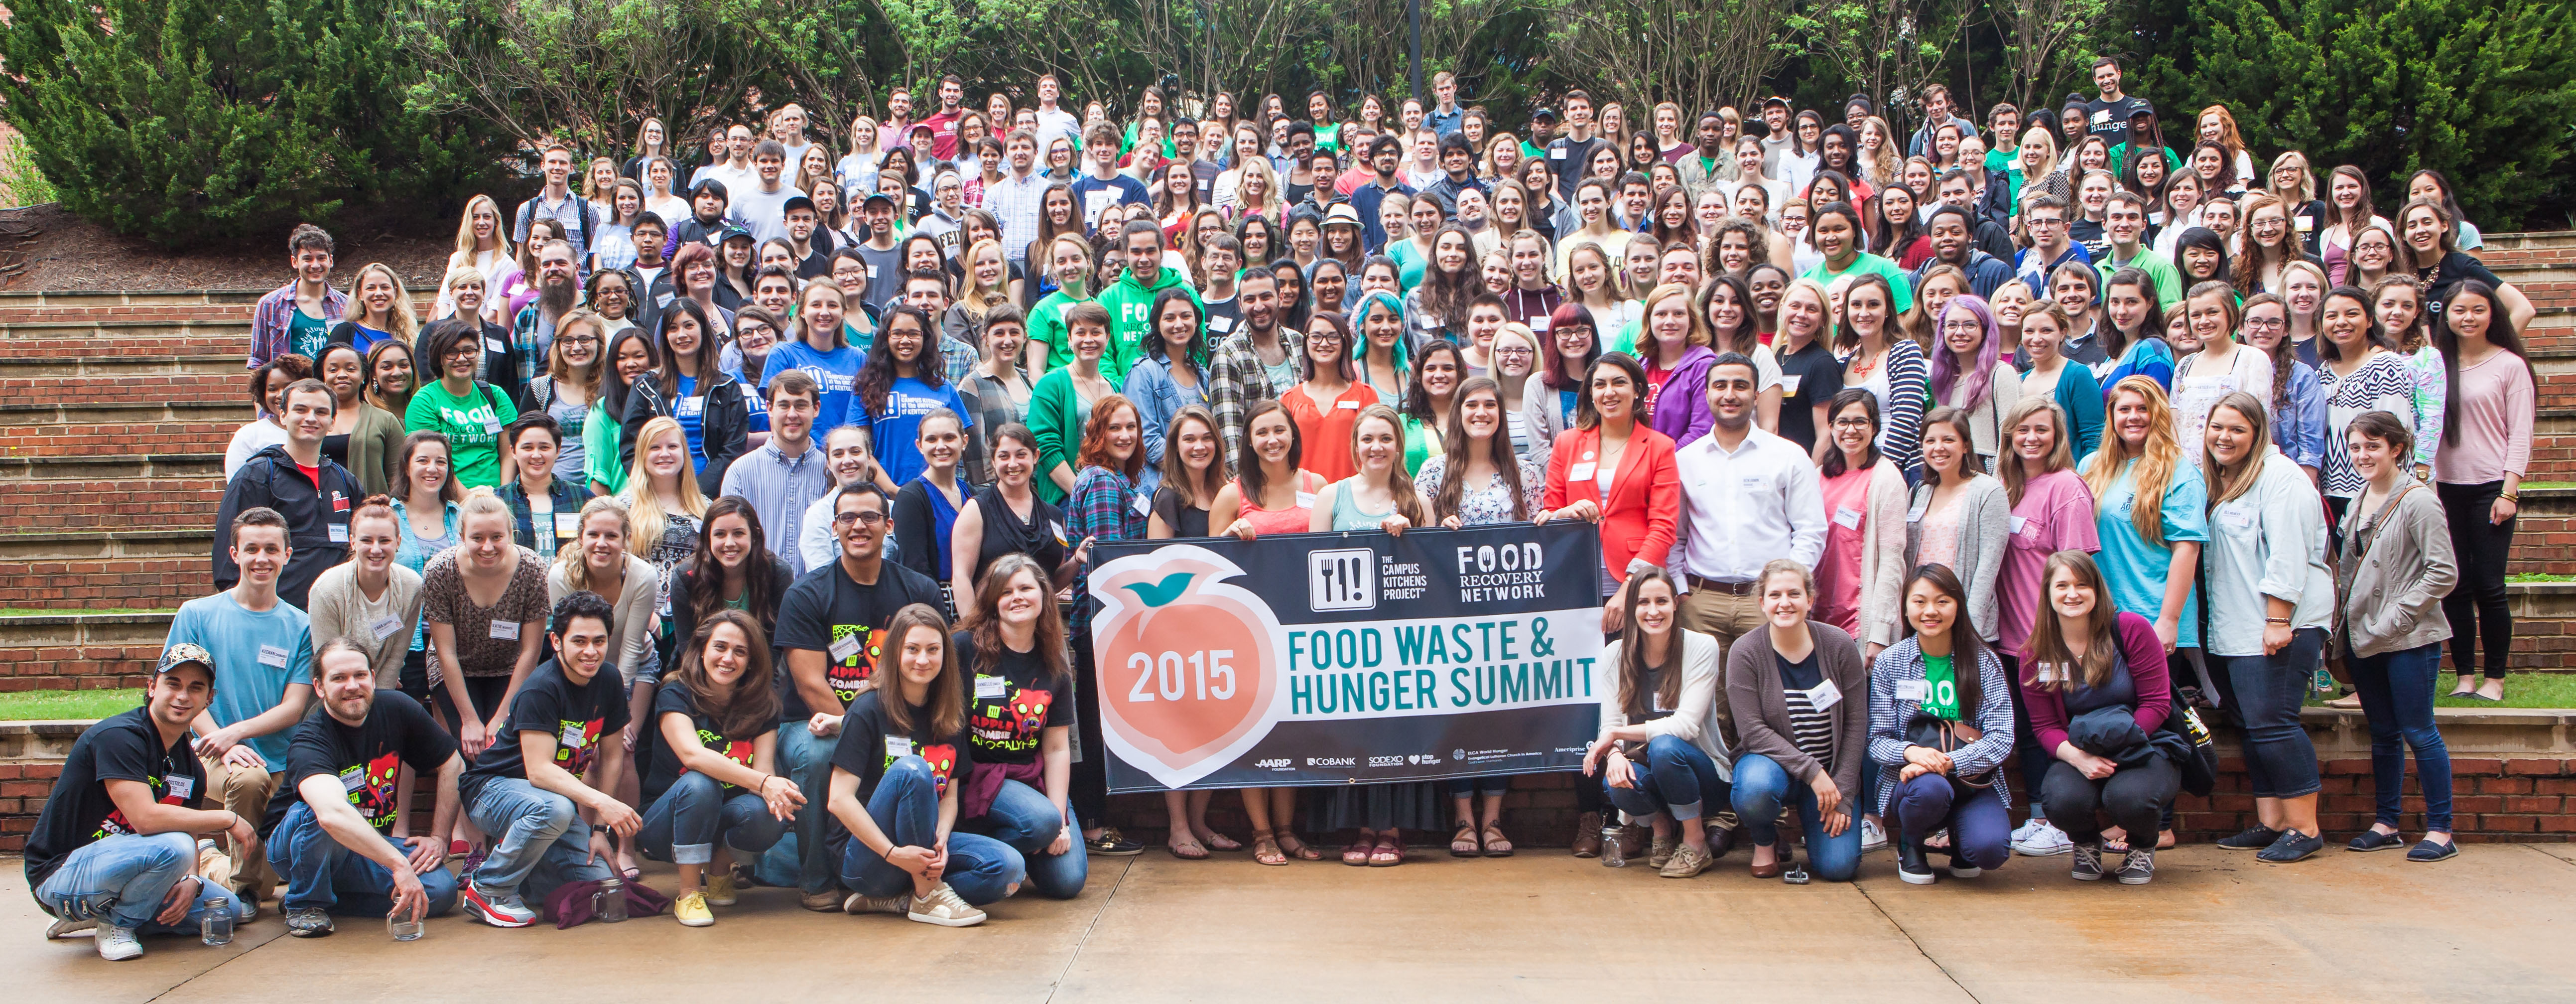 2015 Food Waste and Hunger Summit